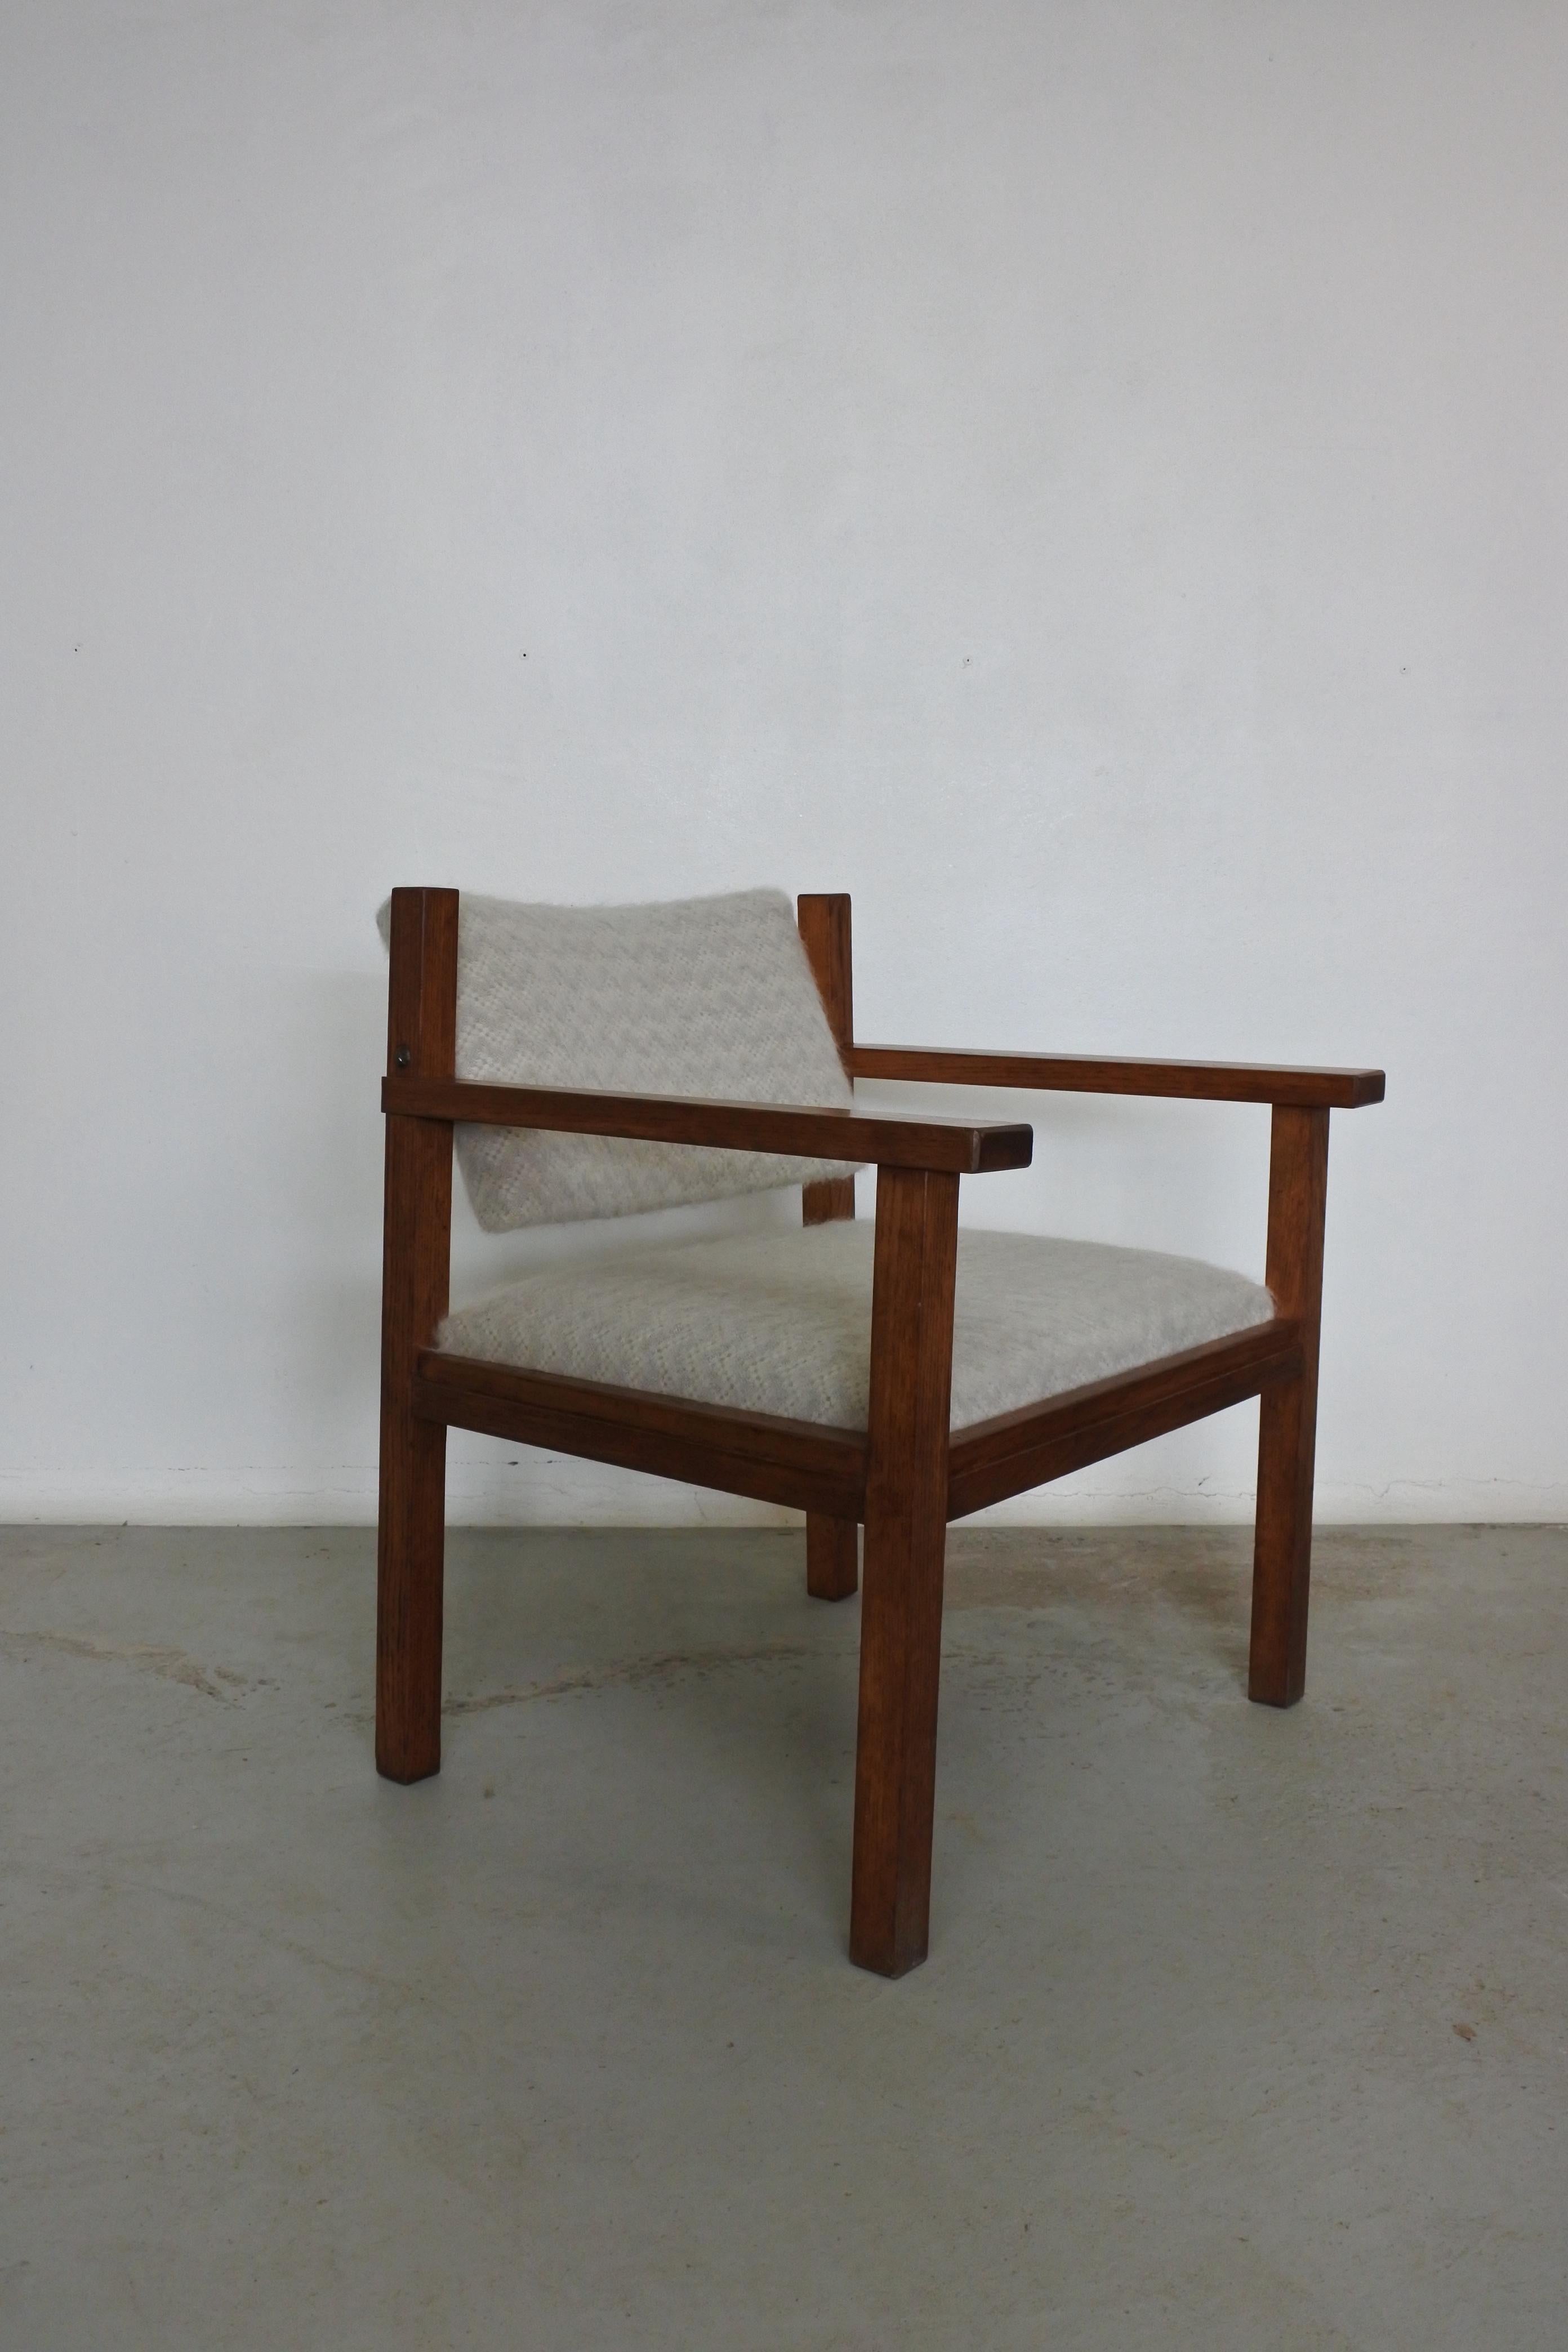 French Modernist Armchair in Oak Wood, France, 1940s For Sale